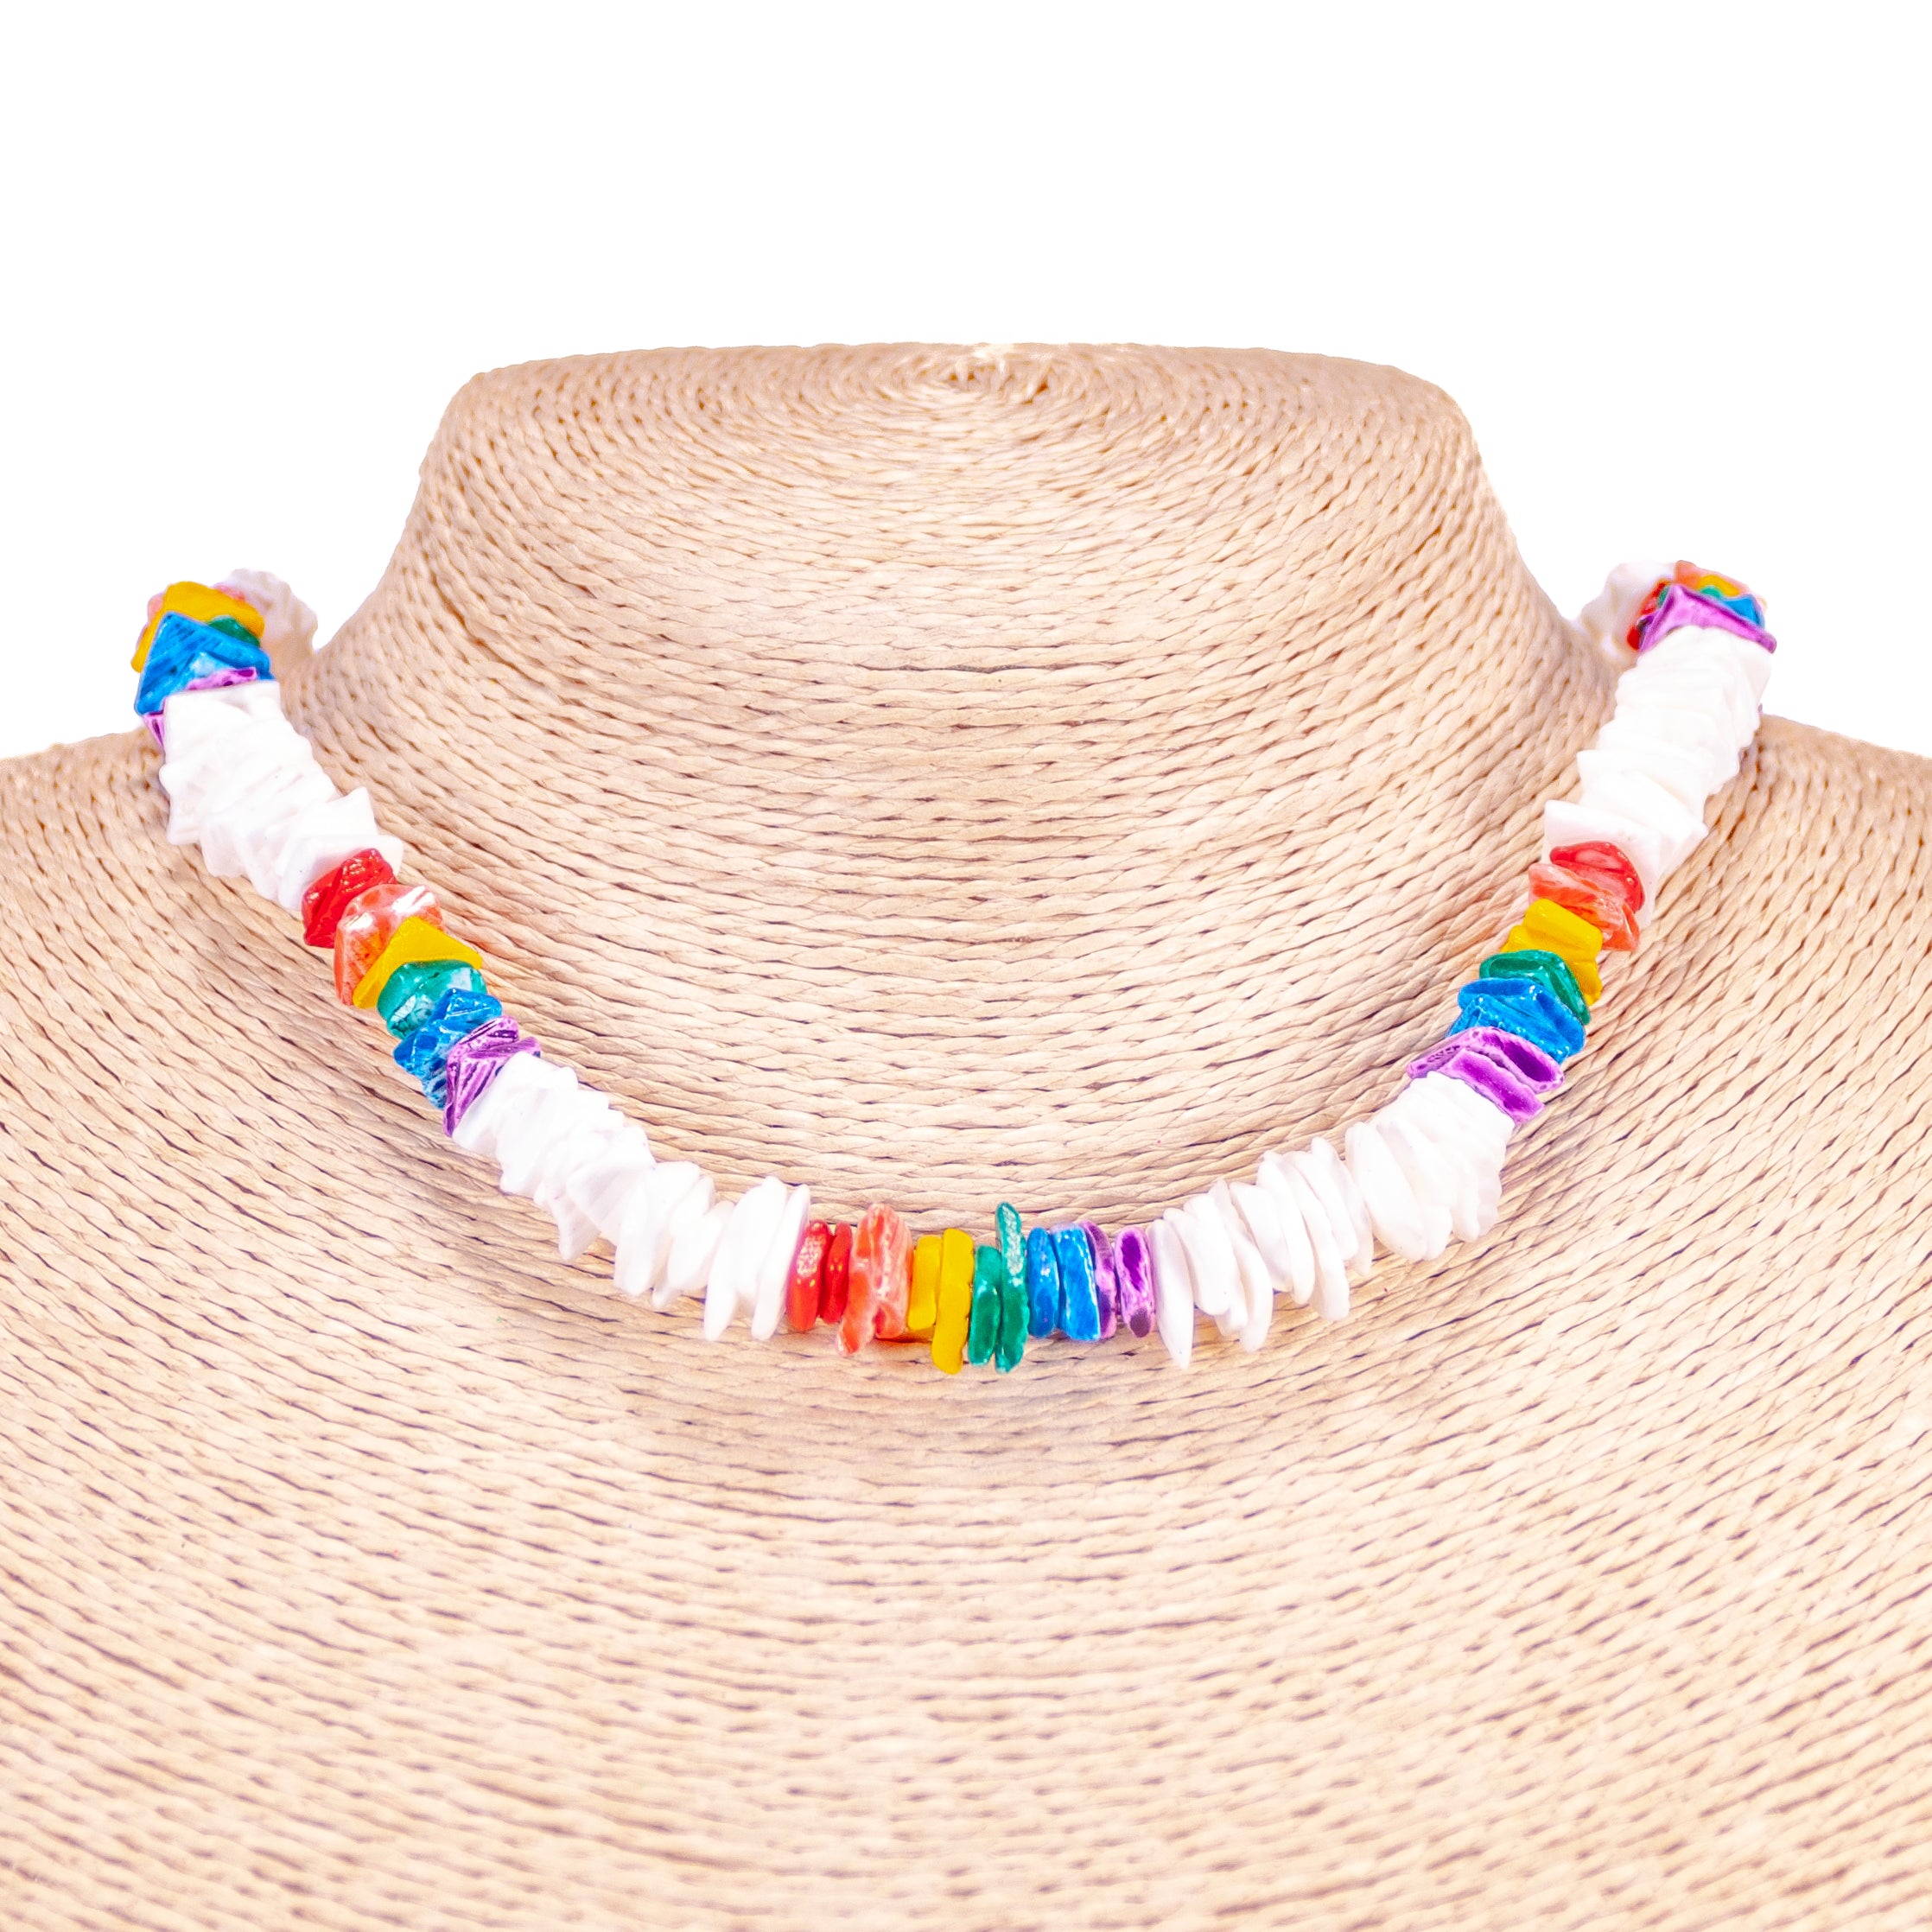 White & Rainbow Colored Puka Chip Shells Necklace & Anklet